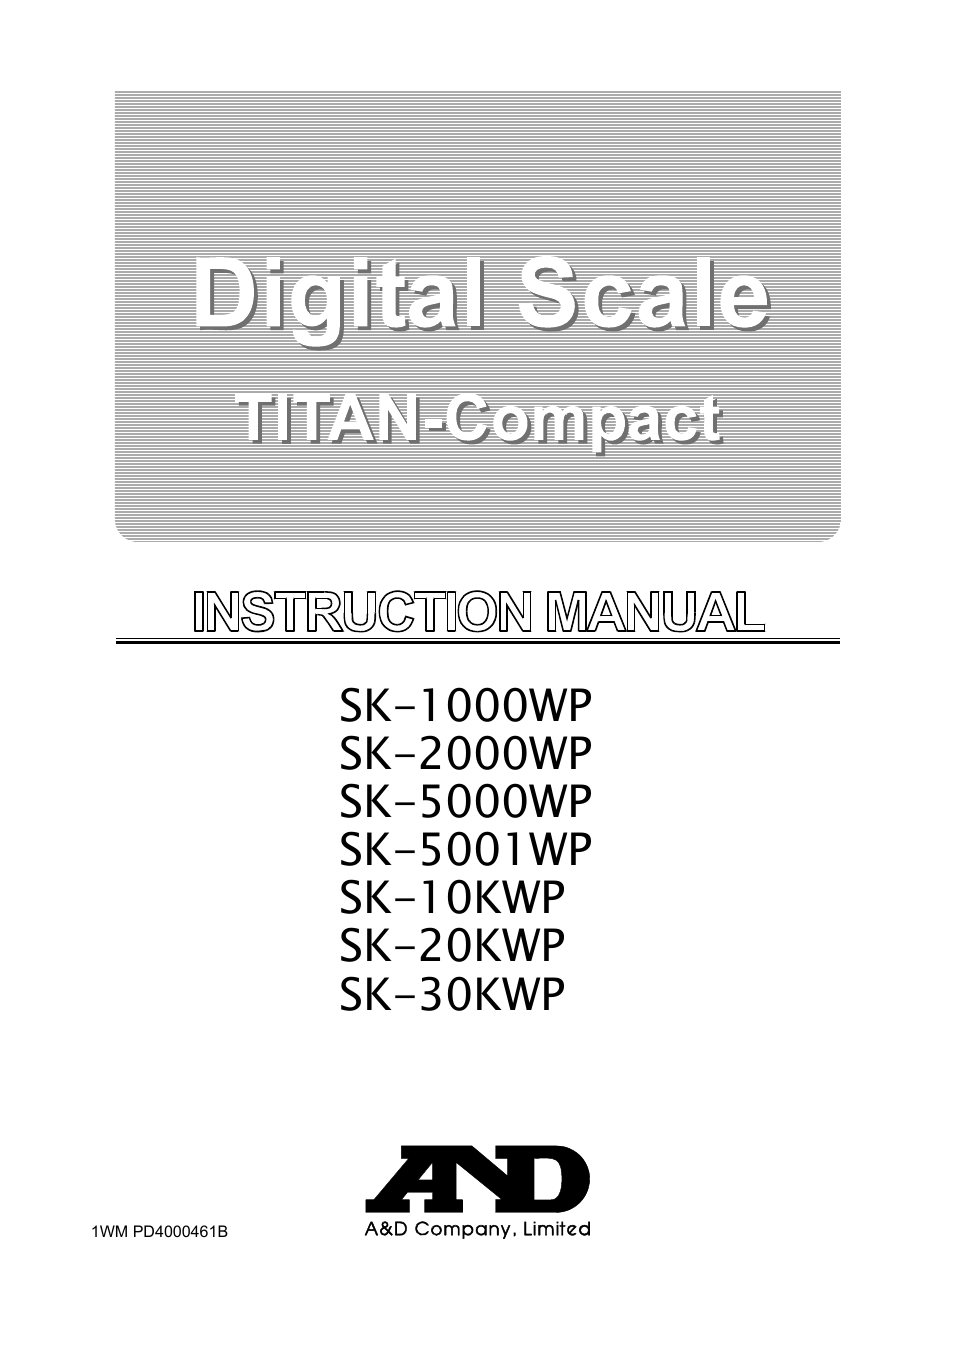 Digital Scale SK-5000WP (Page 1)